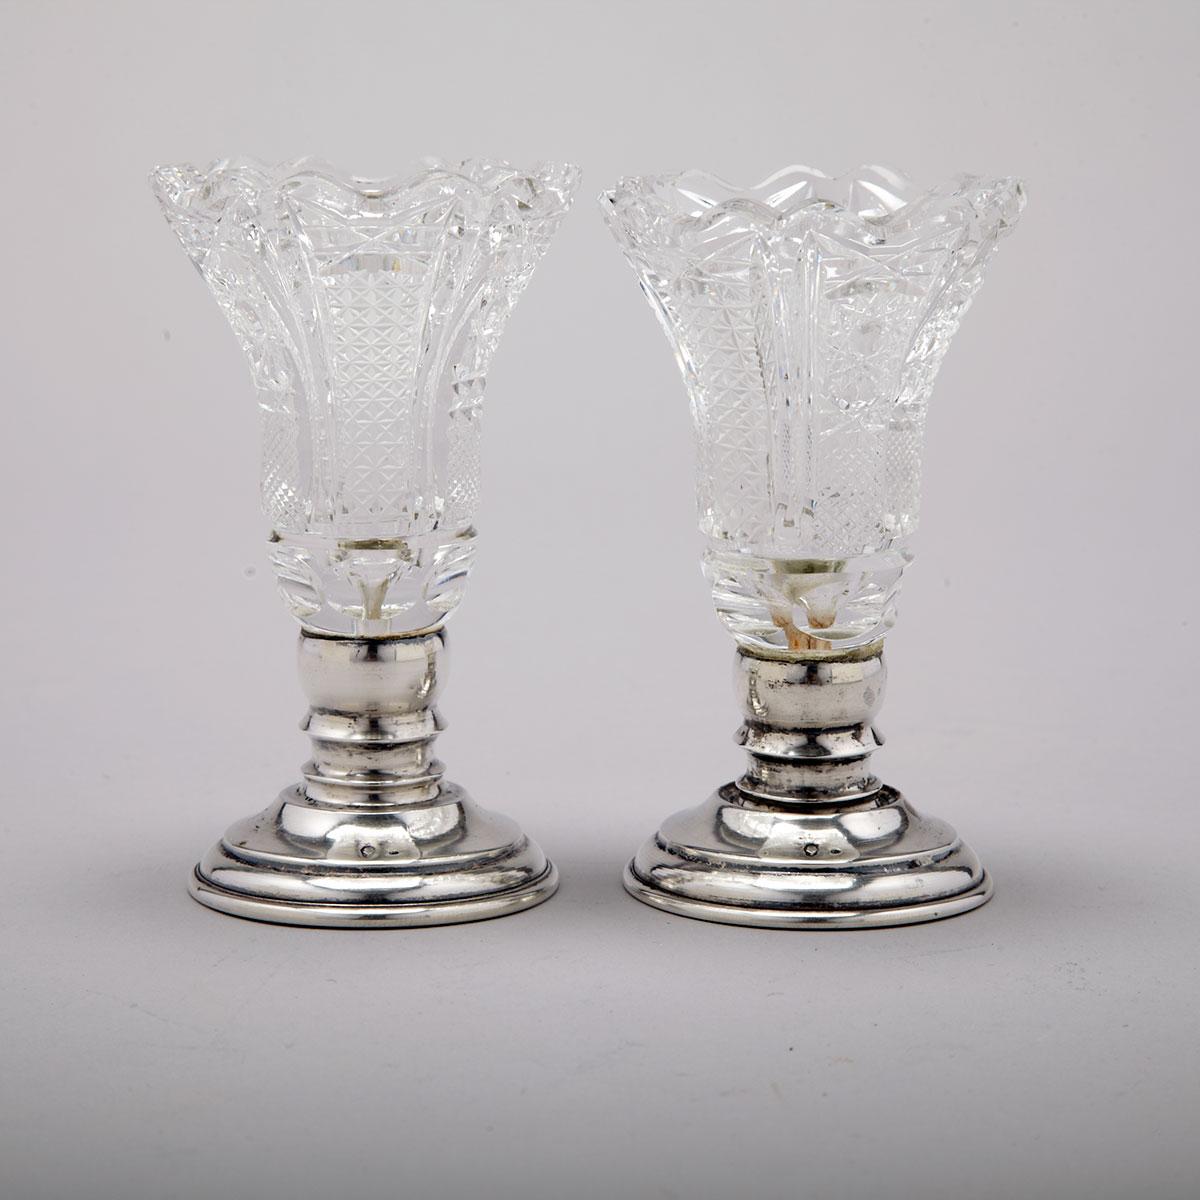 Pair of Austro-Hungarian Silver Mounted Cut Glass Small Vases, early 20th century